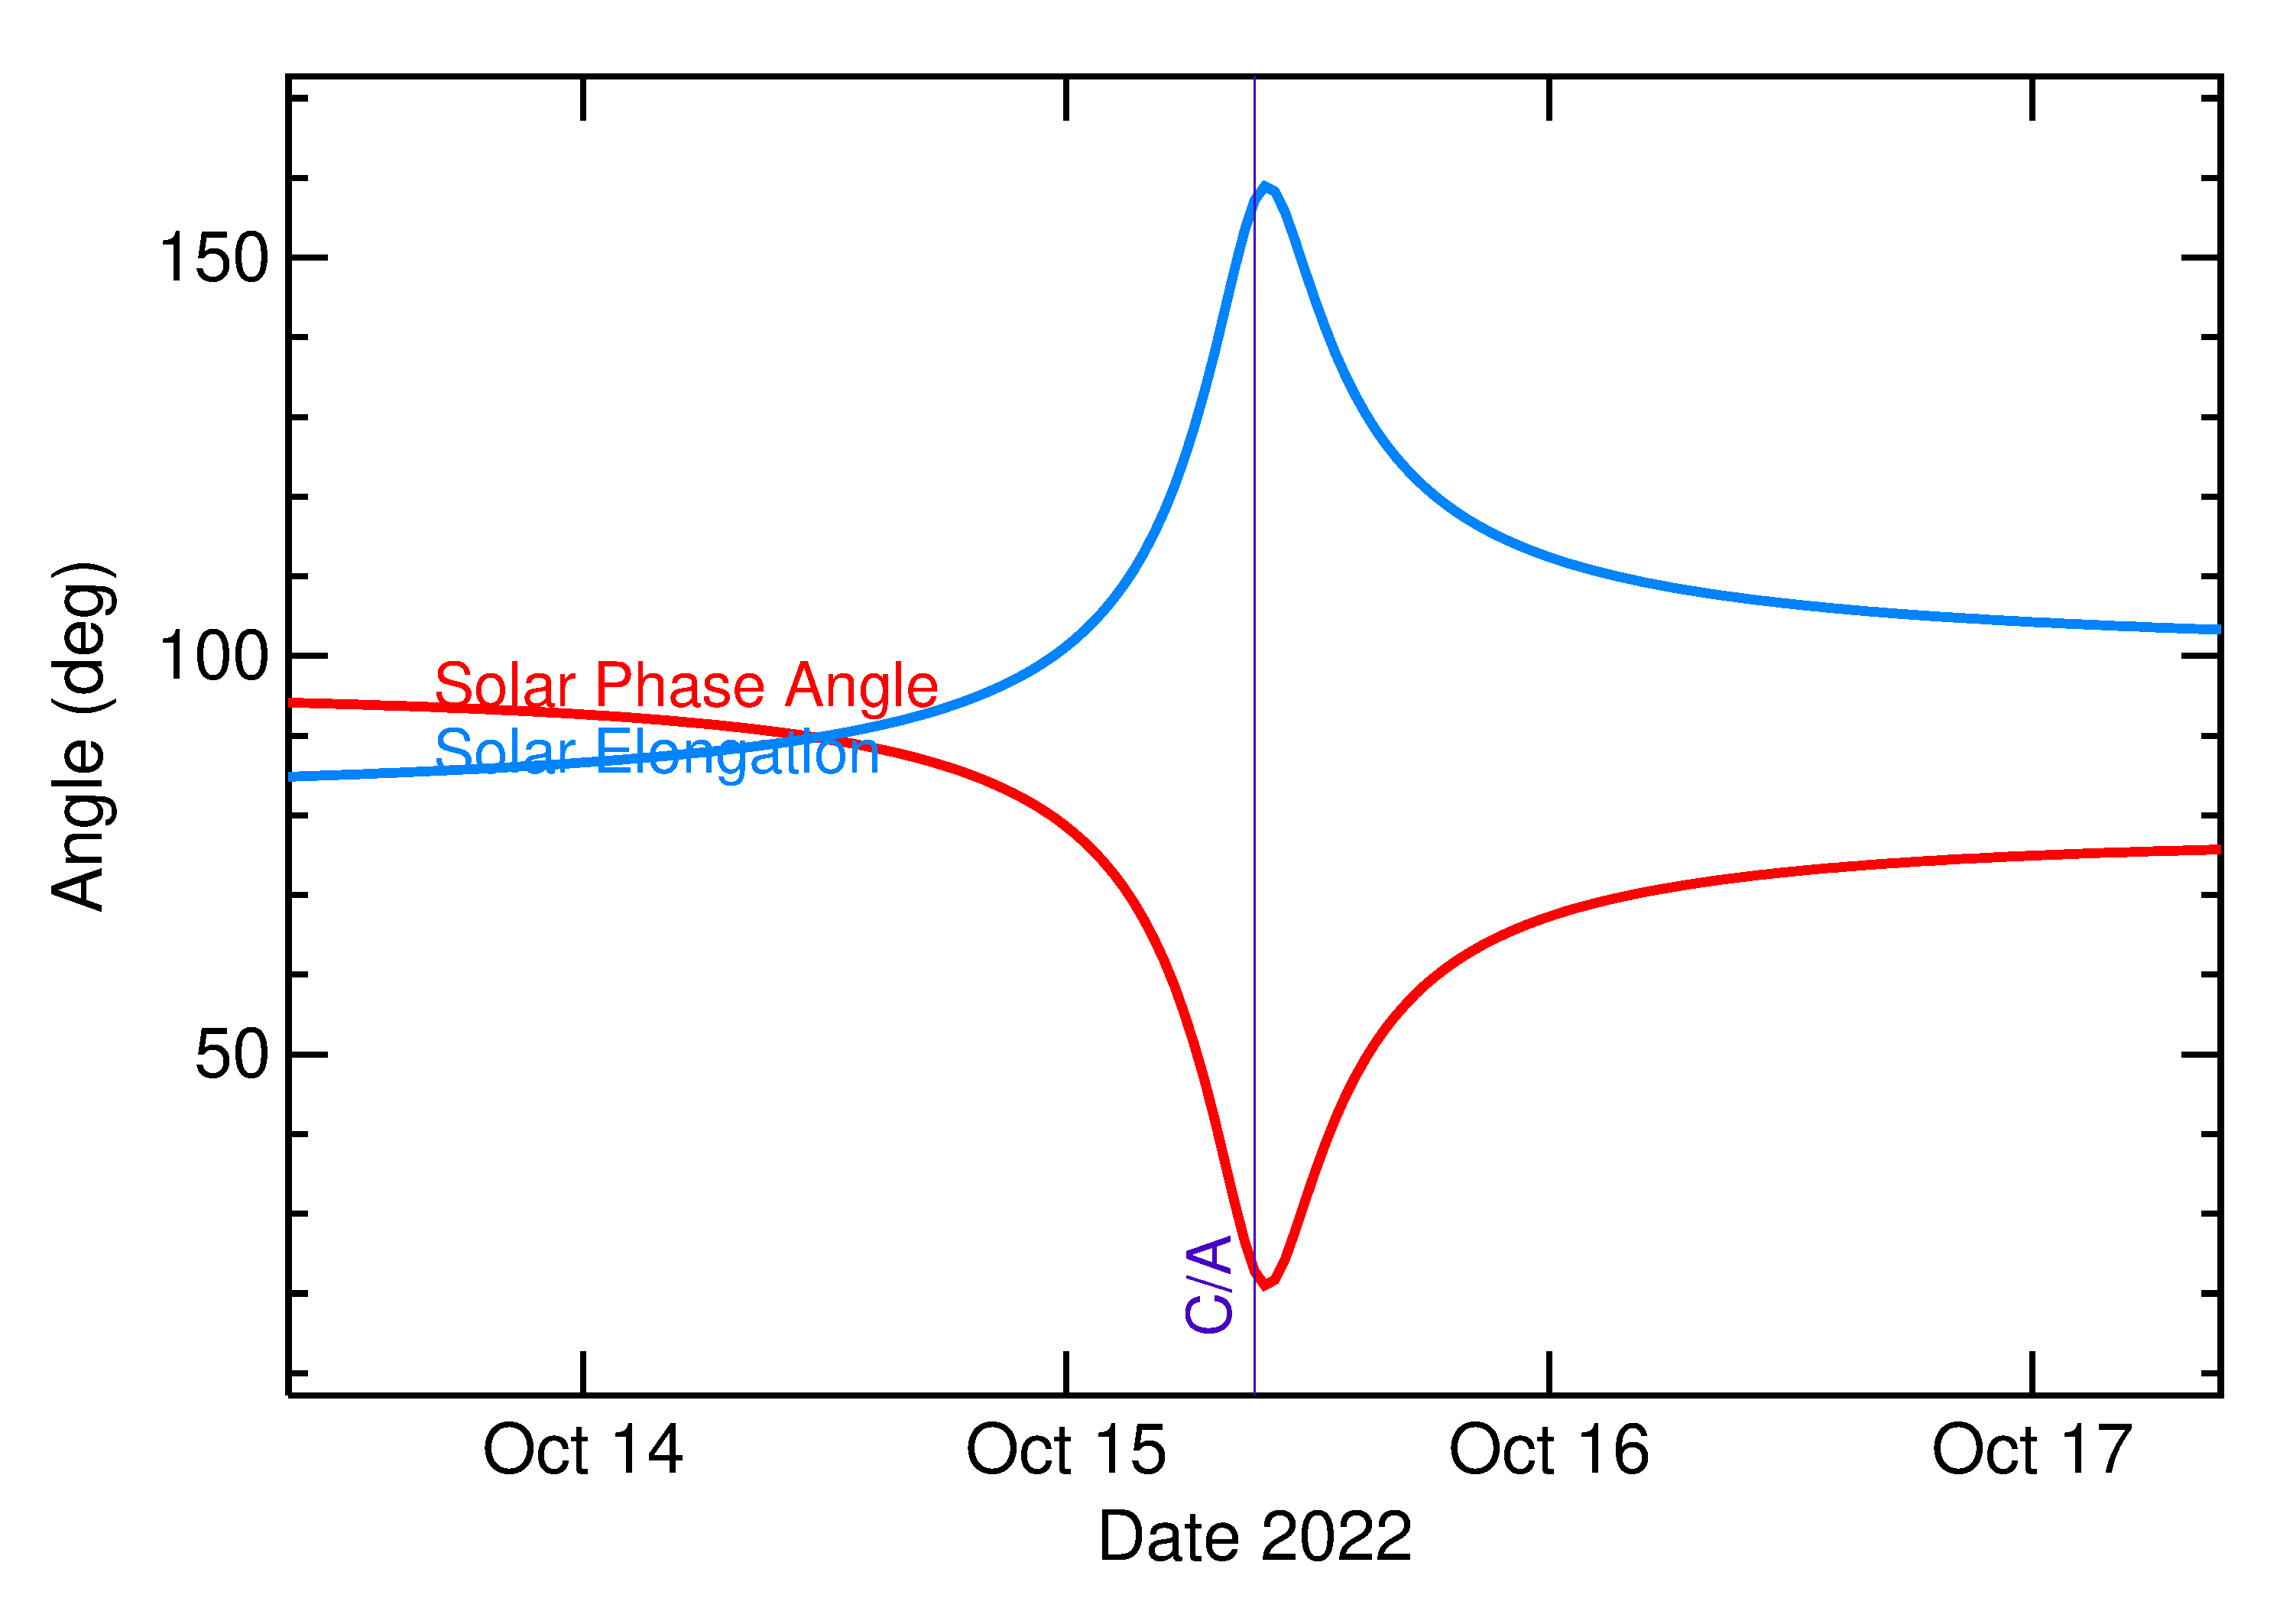 Solar Elongation and Solar Phase Angle of 2022 TM2 in the days around closest approach